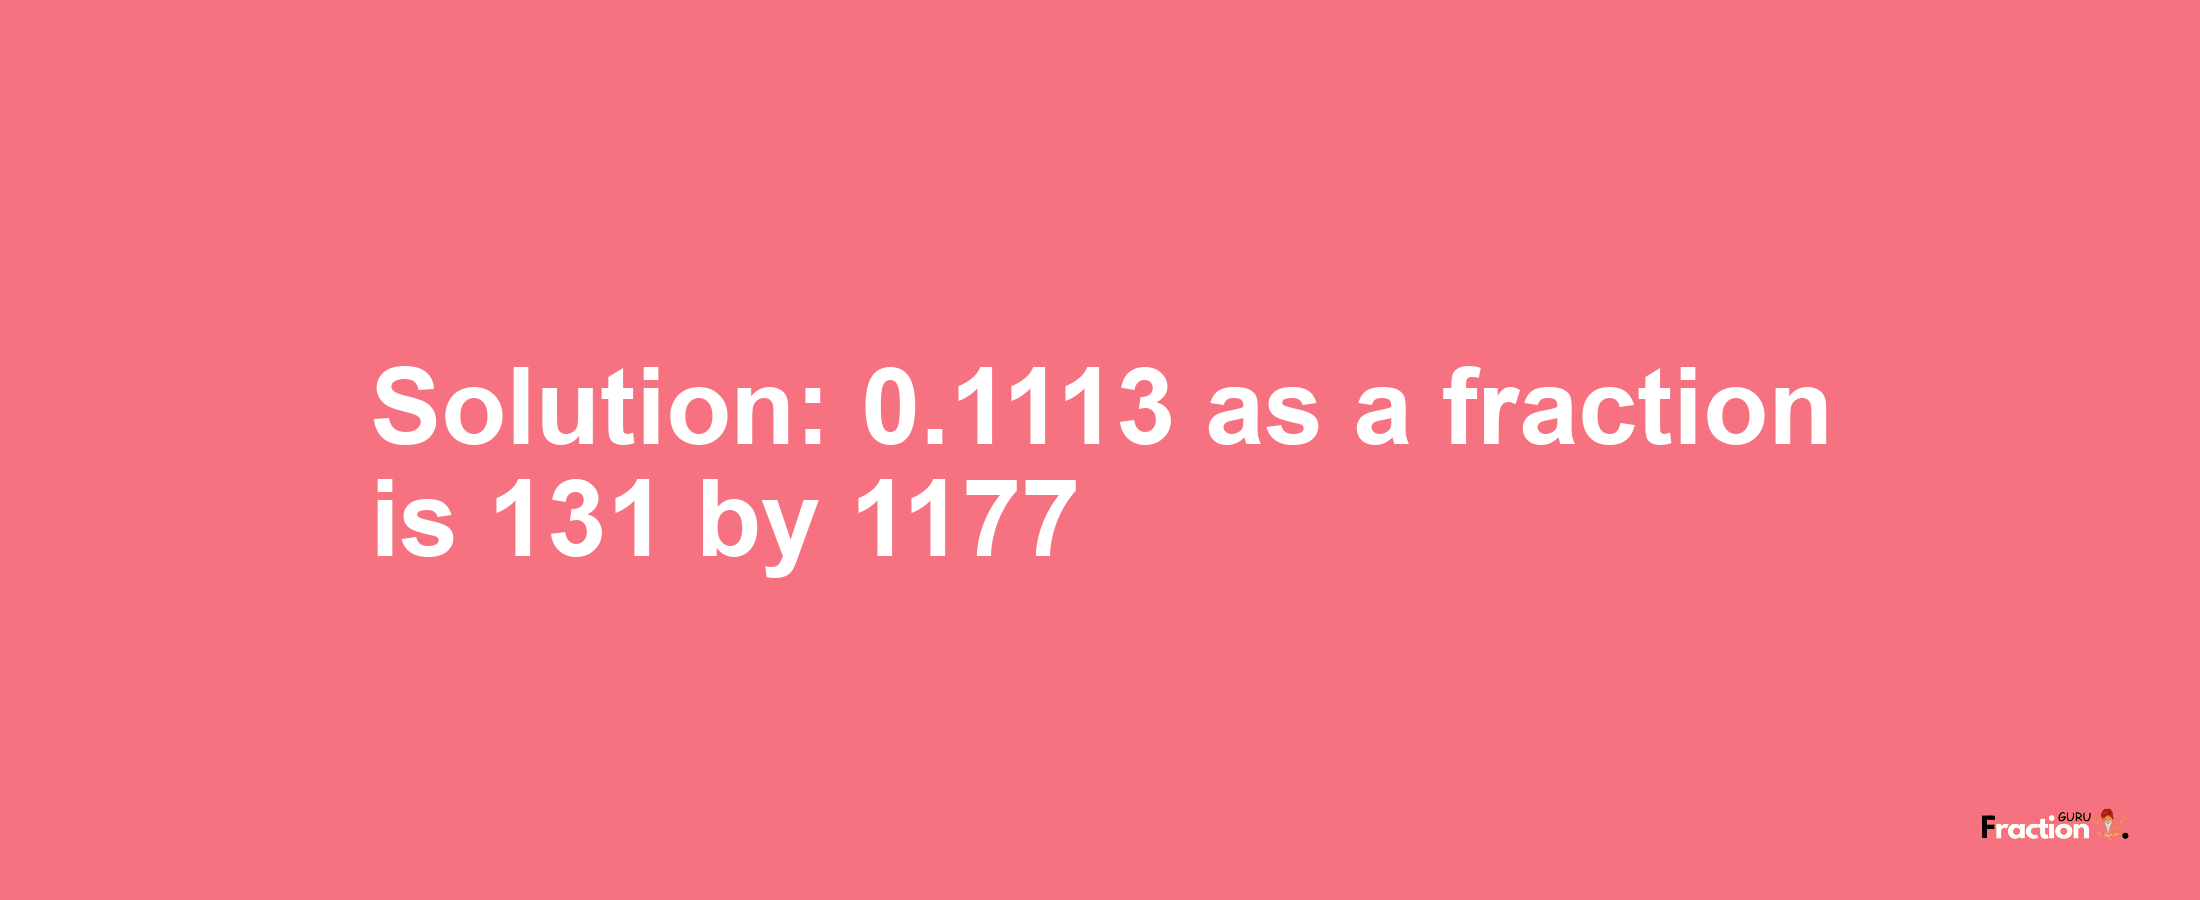 Solution:0.1113 as a fraction is 131/1177